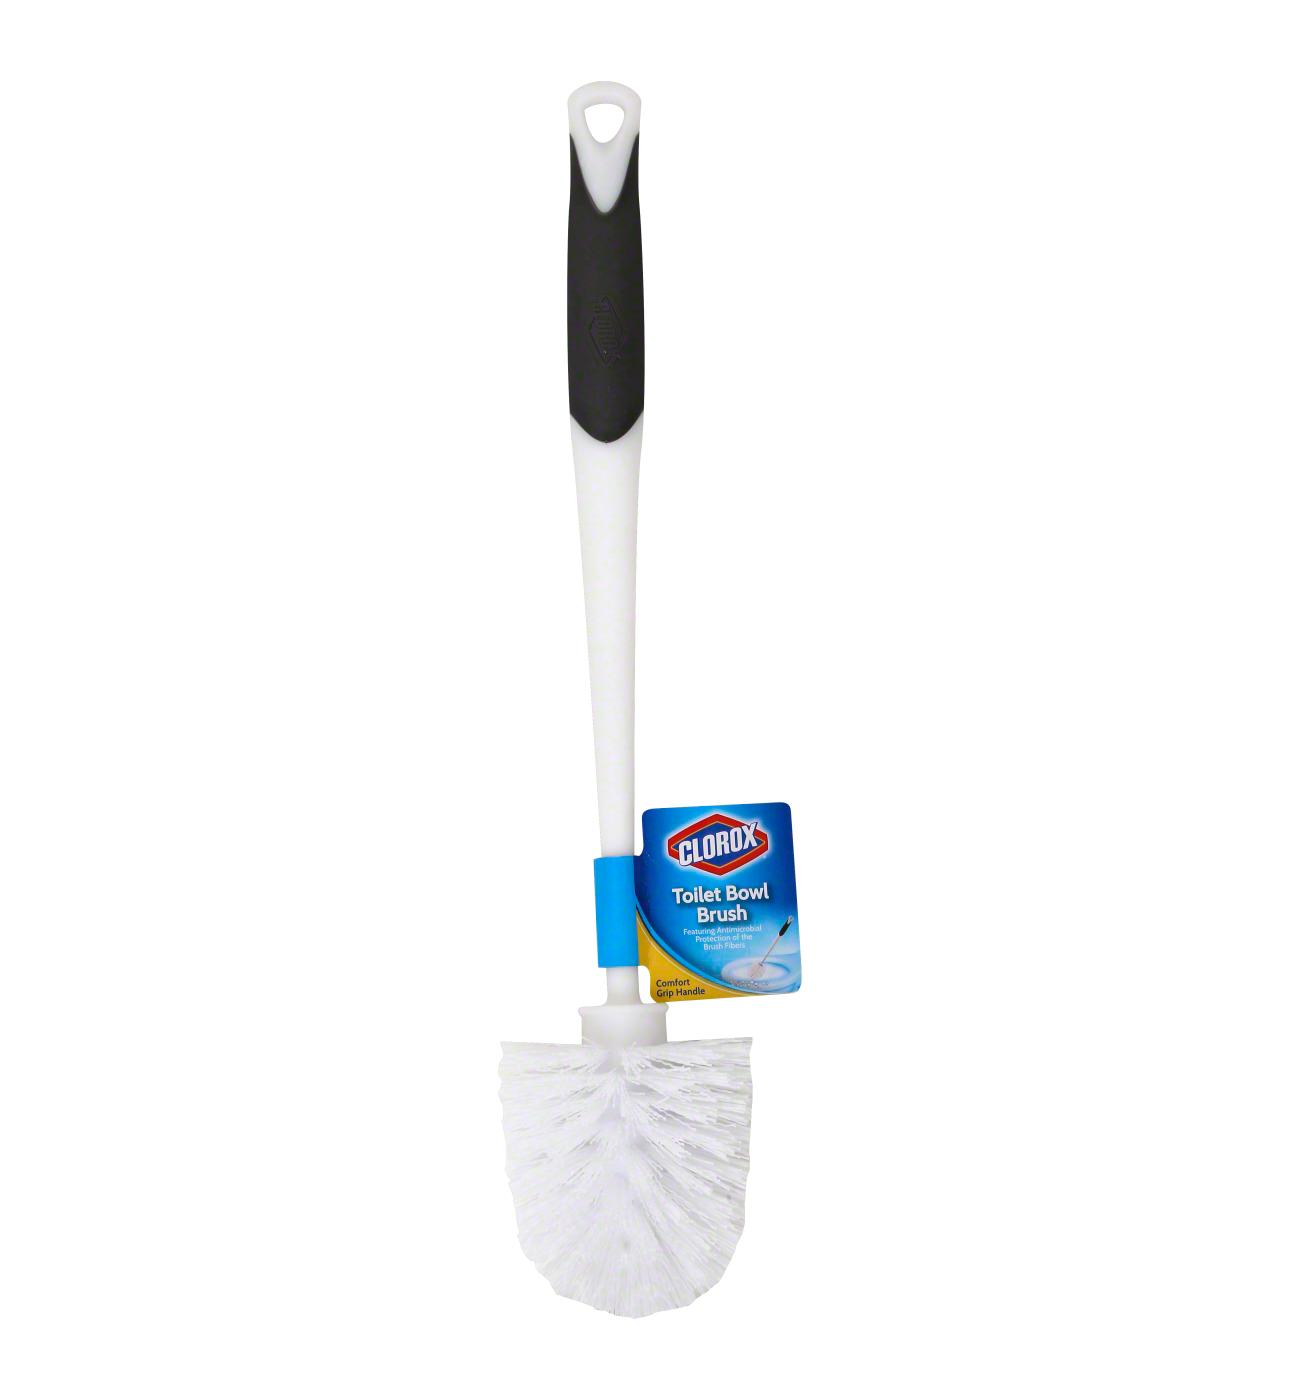 Clorox Toilet Bowl Brush with Comfort Grip; image 1 of 2